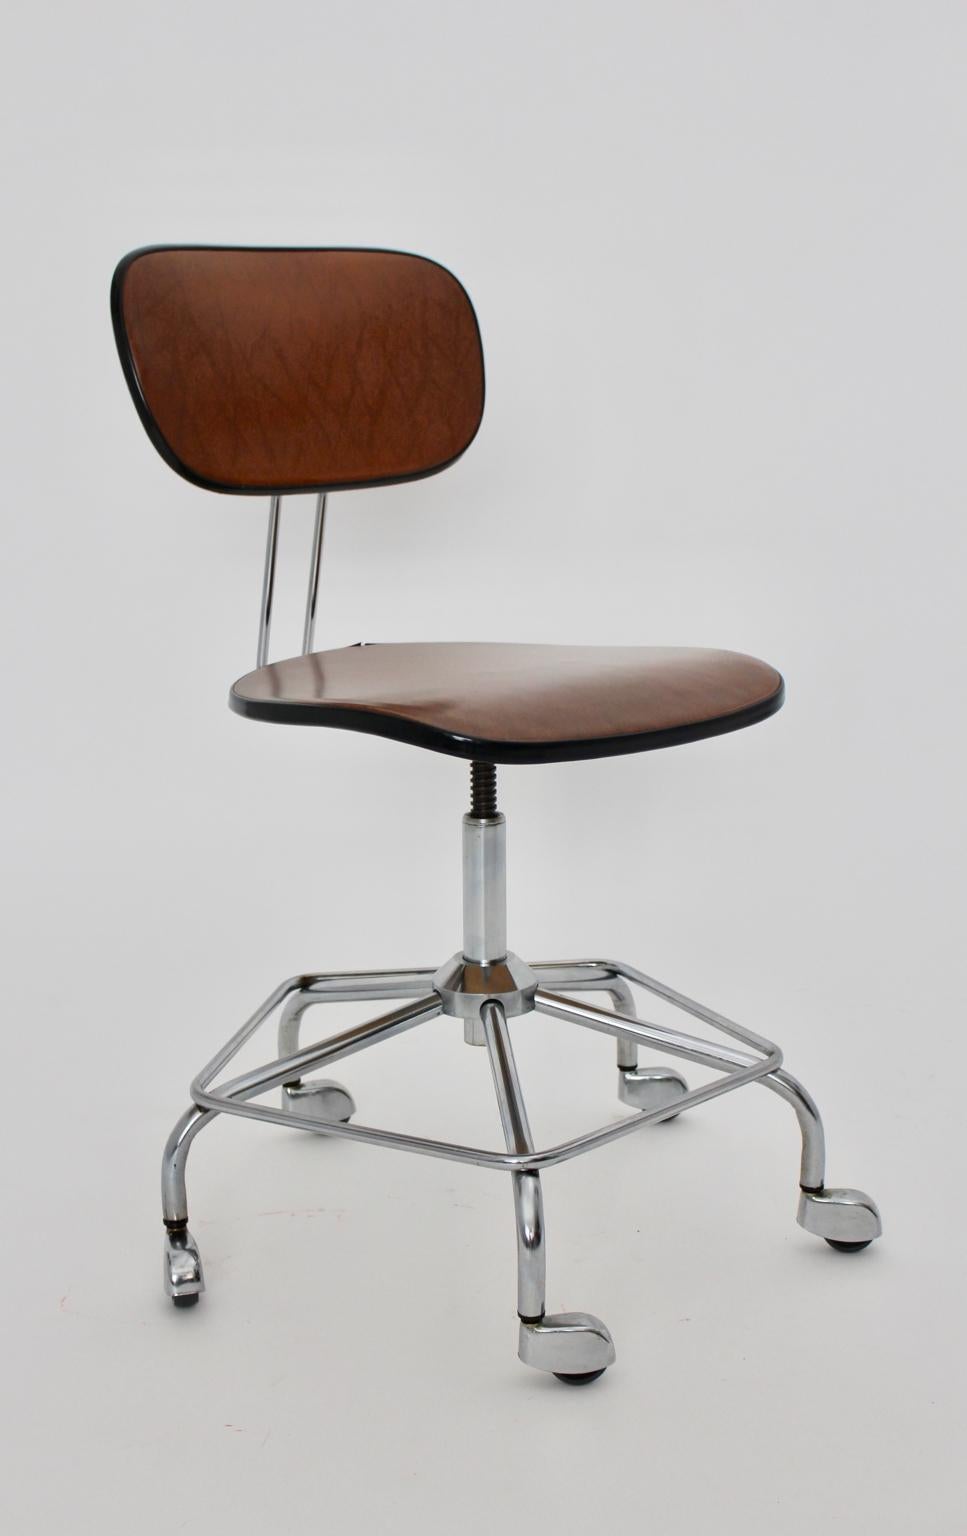 20th Century Mid-Century Modern Vintage Desk Chair Attributed to Egon Eiermann, 1950, Germany For Sale